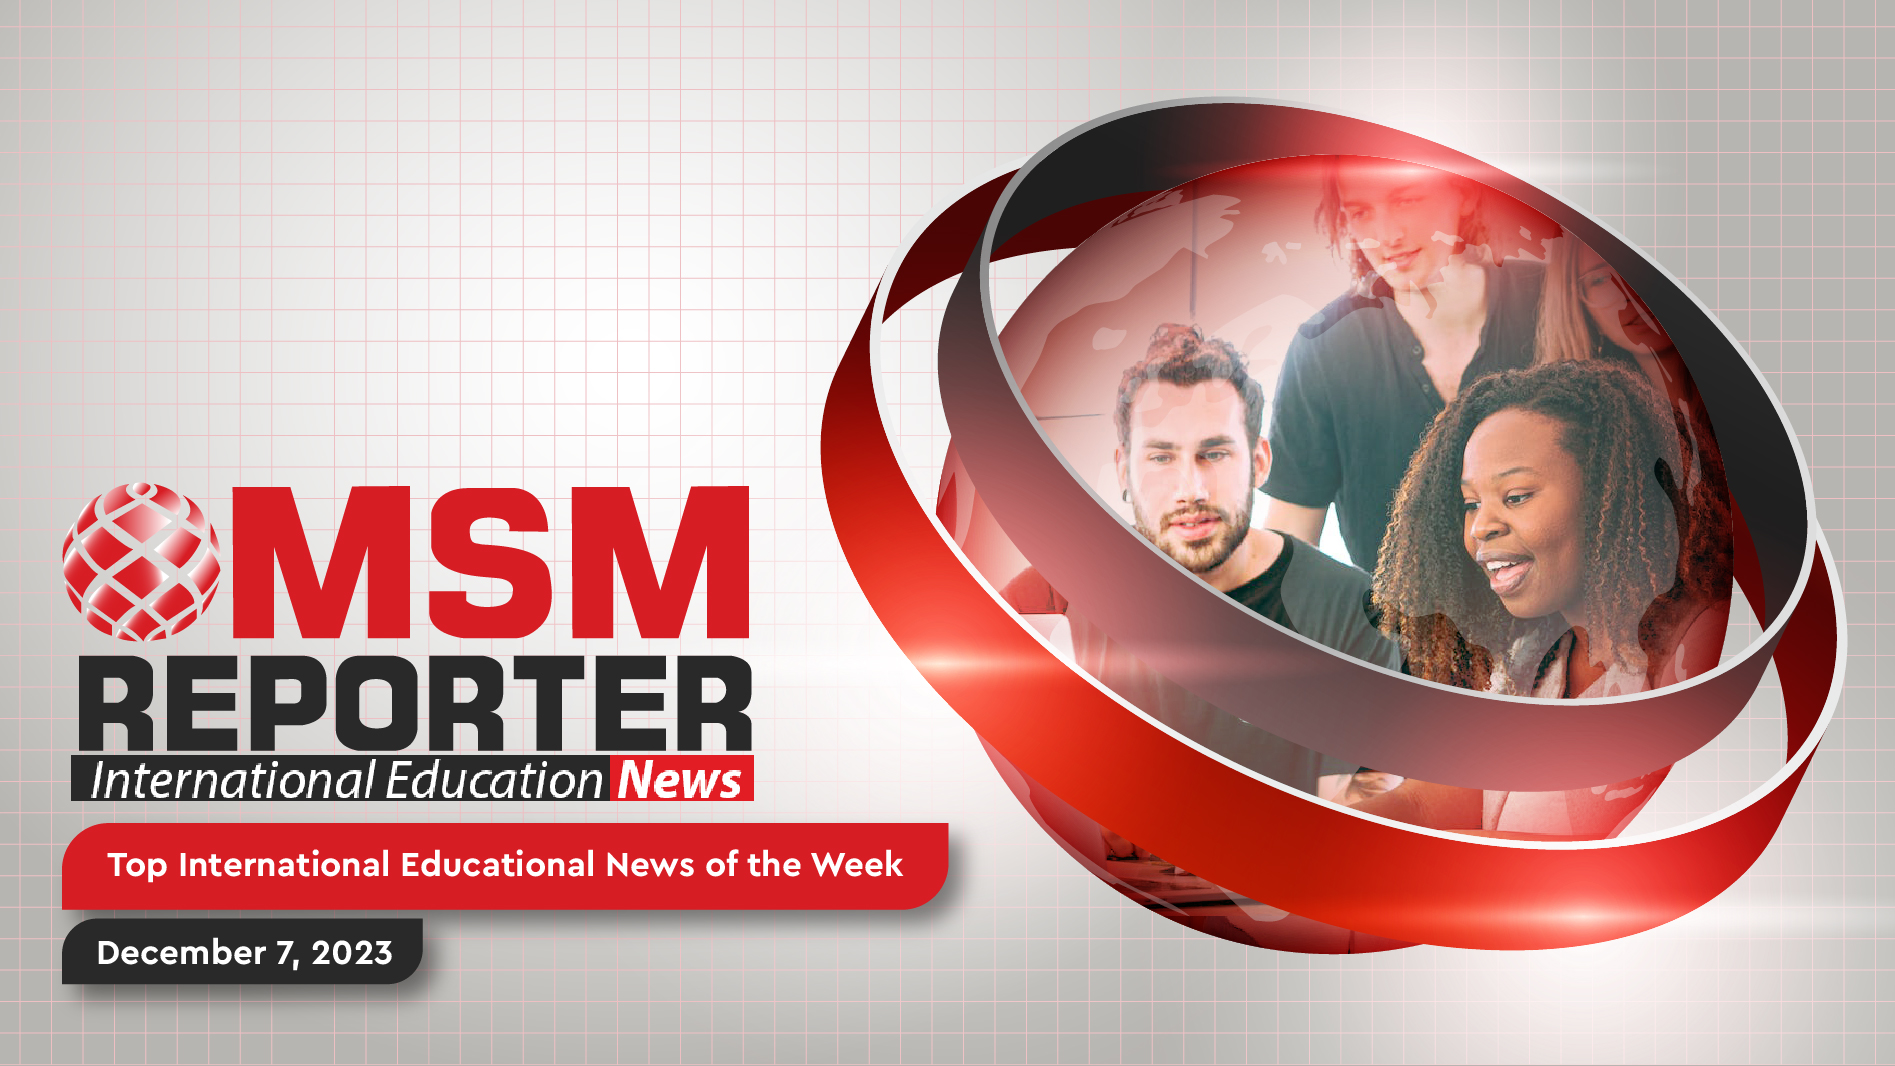 200K foreign workers as US ‘students,’ Canada to reinstate 20-hour work week cap, and more in this week’s MSM Reporter